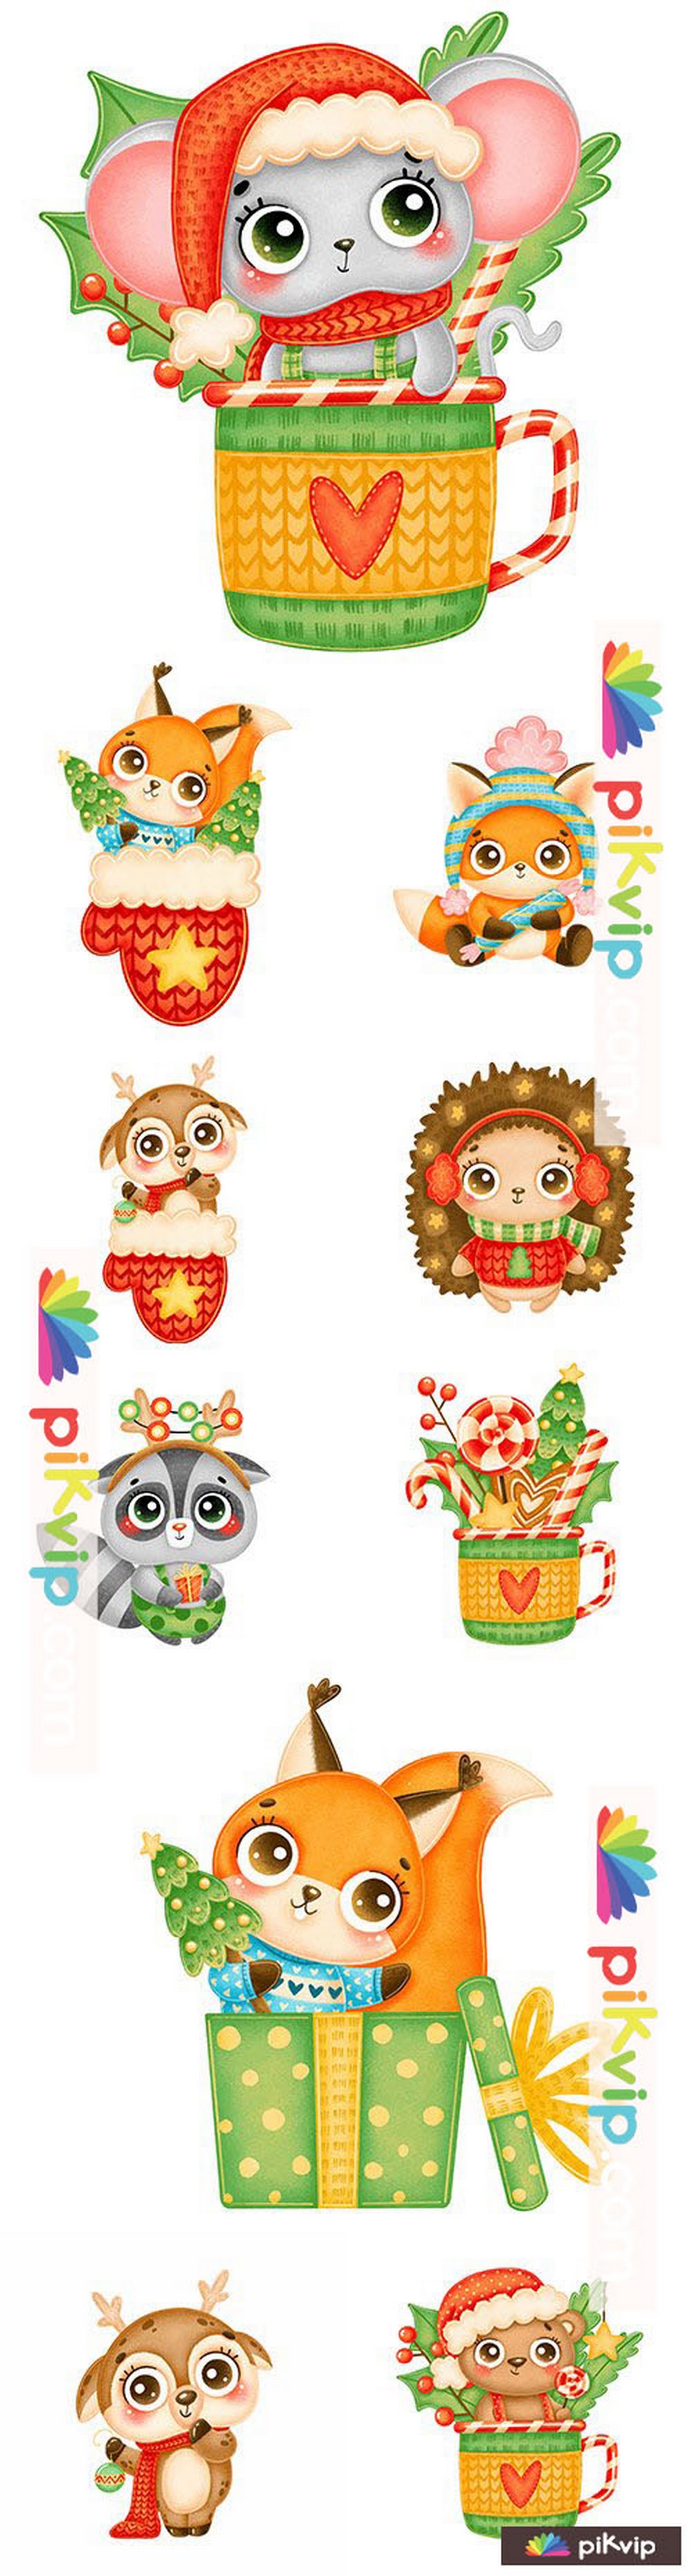 Cute cartoon animals in red hat and mittens Christmas illustrations 2